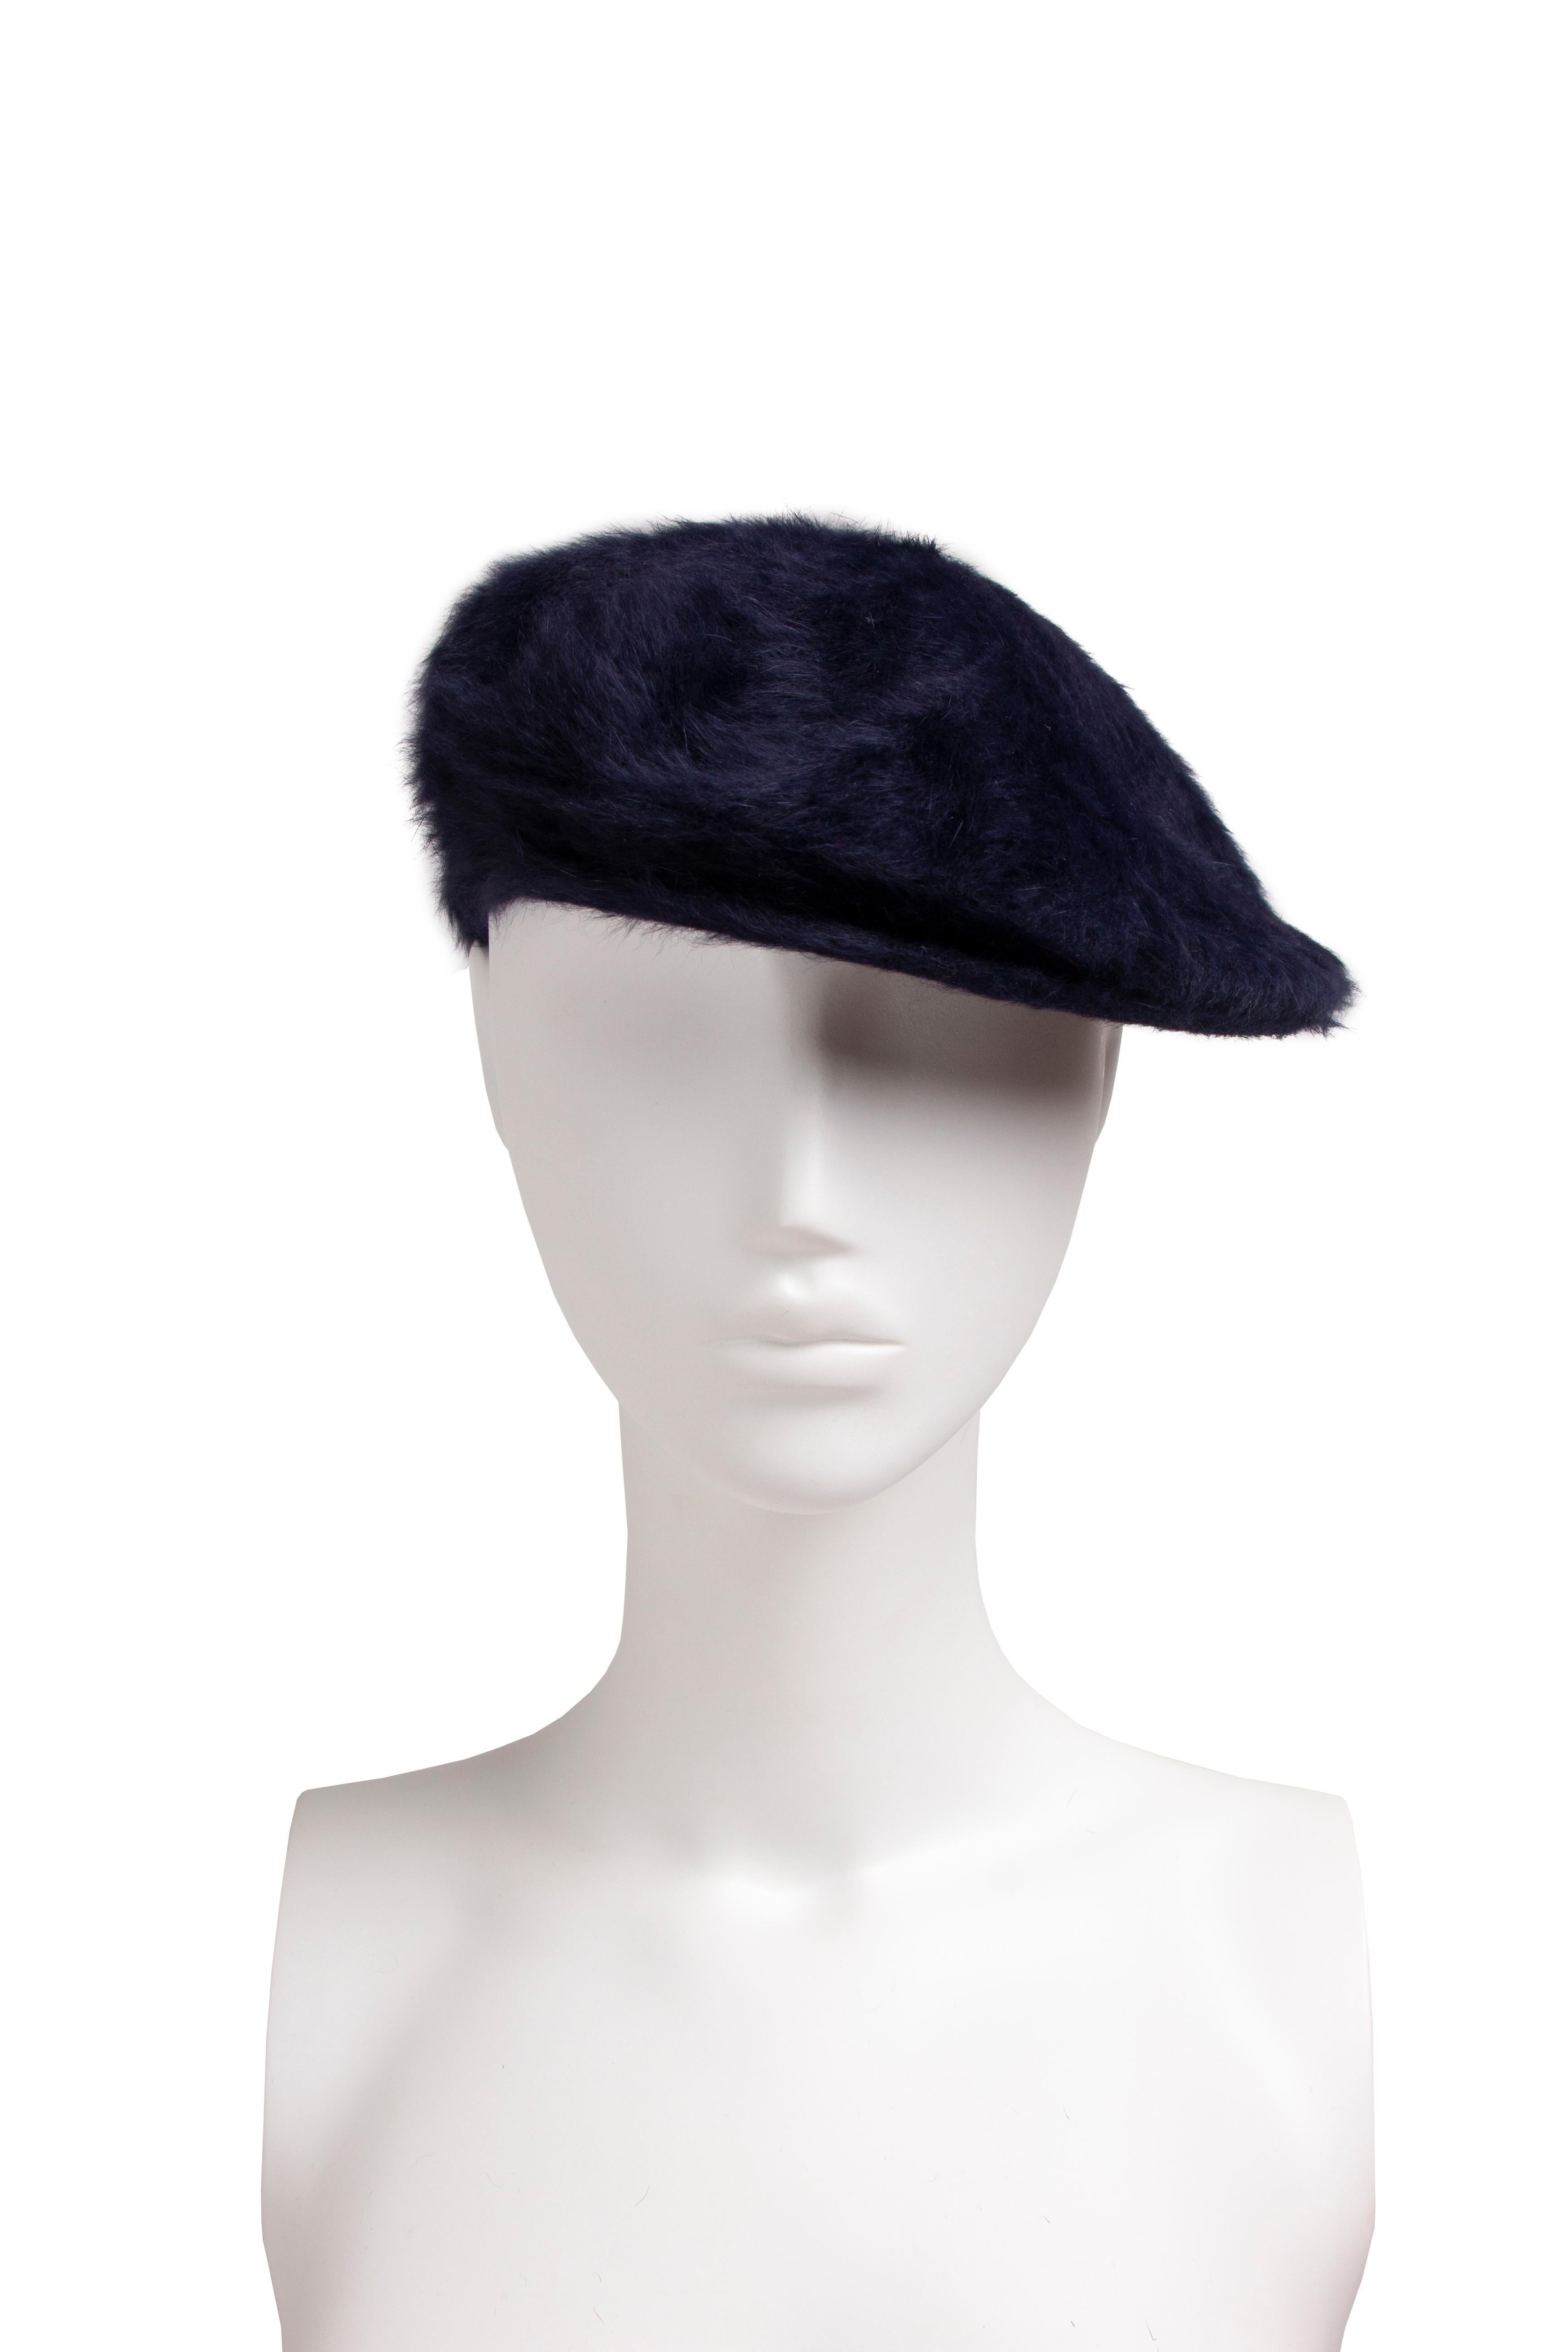 John Galliano navy angora beret hat, fw 1989 In Excellent Condition For Sale In Melbourne, AU